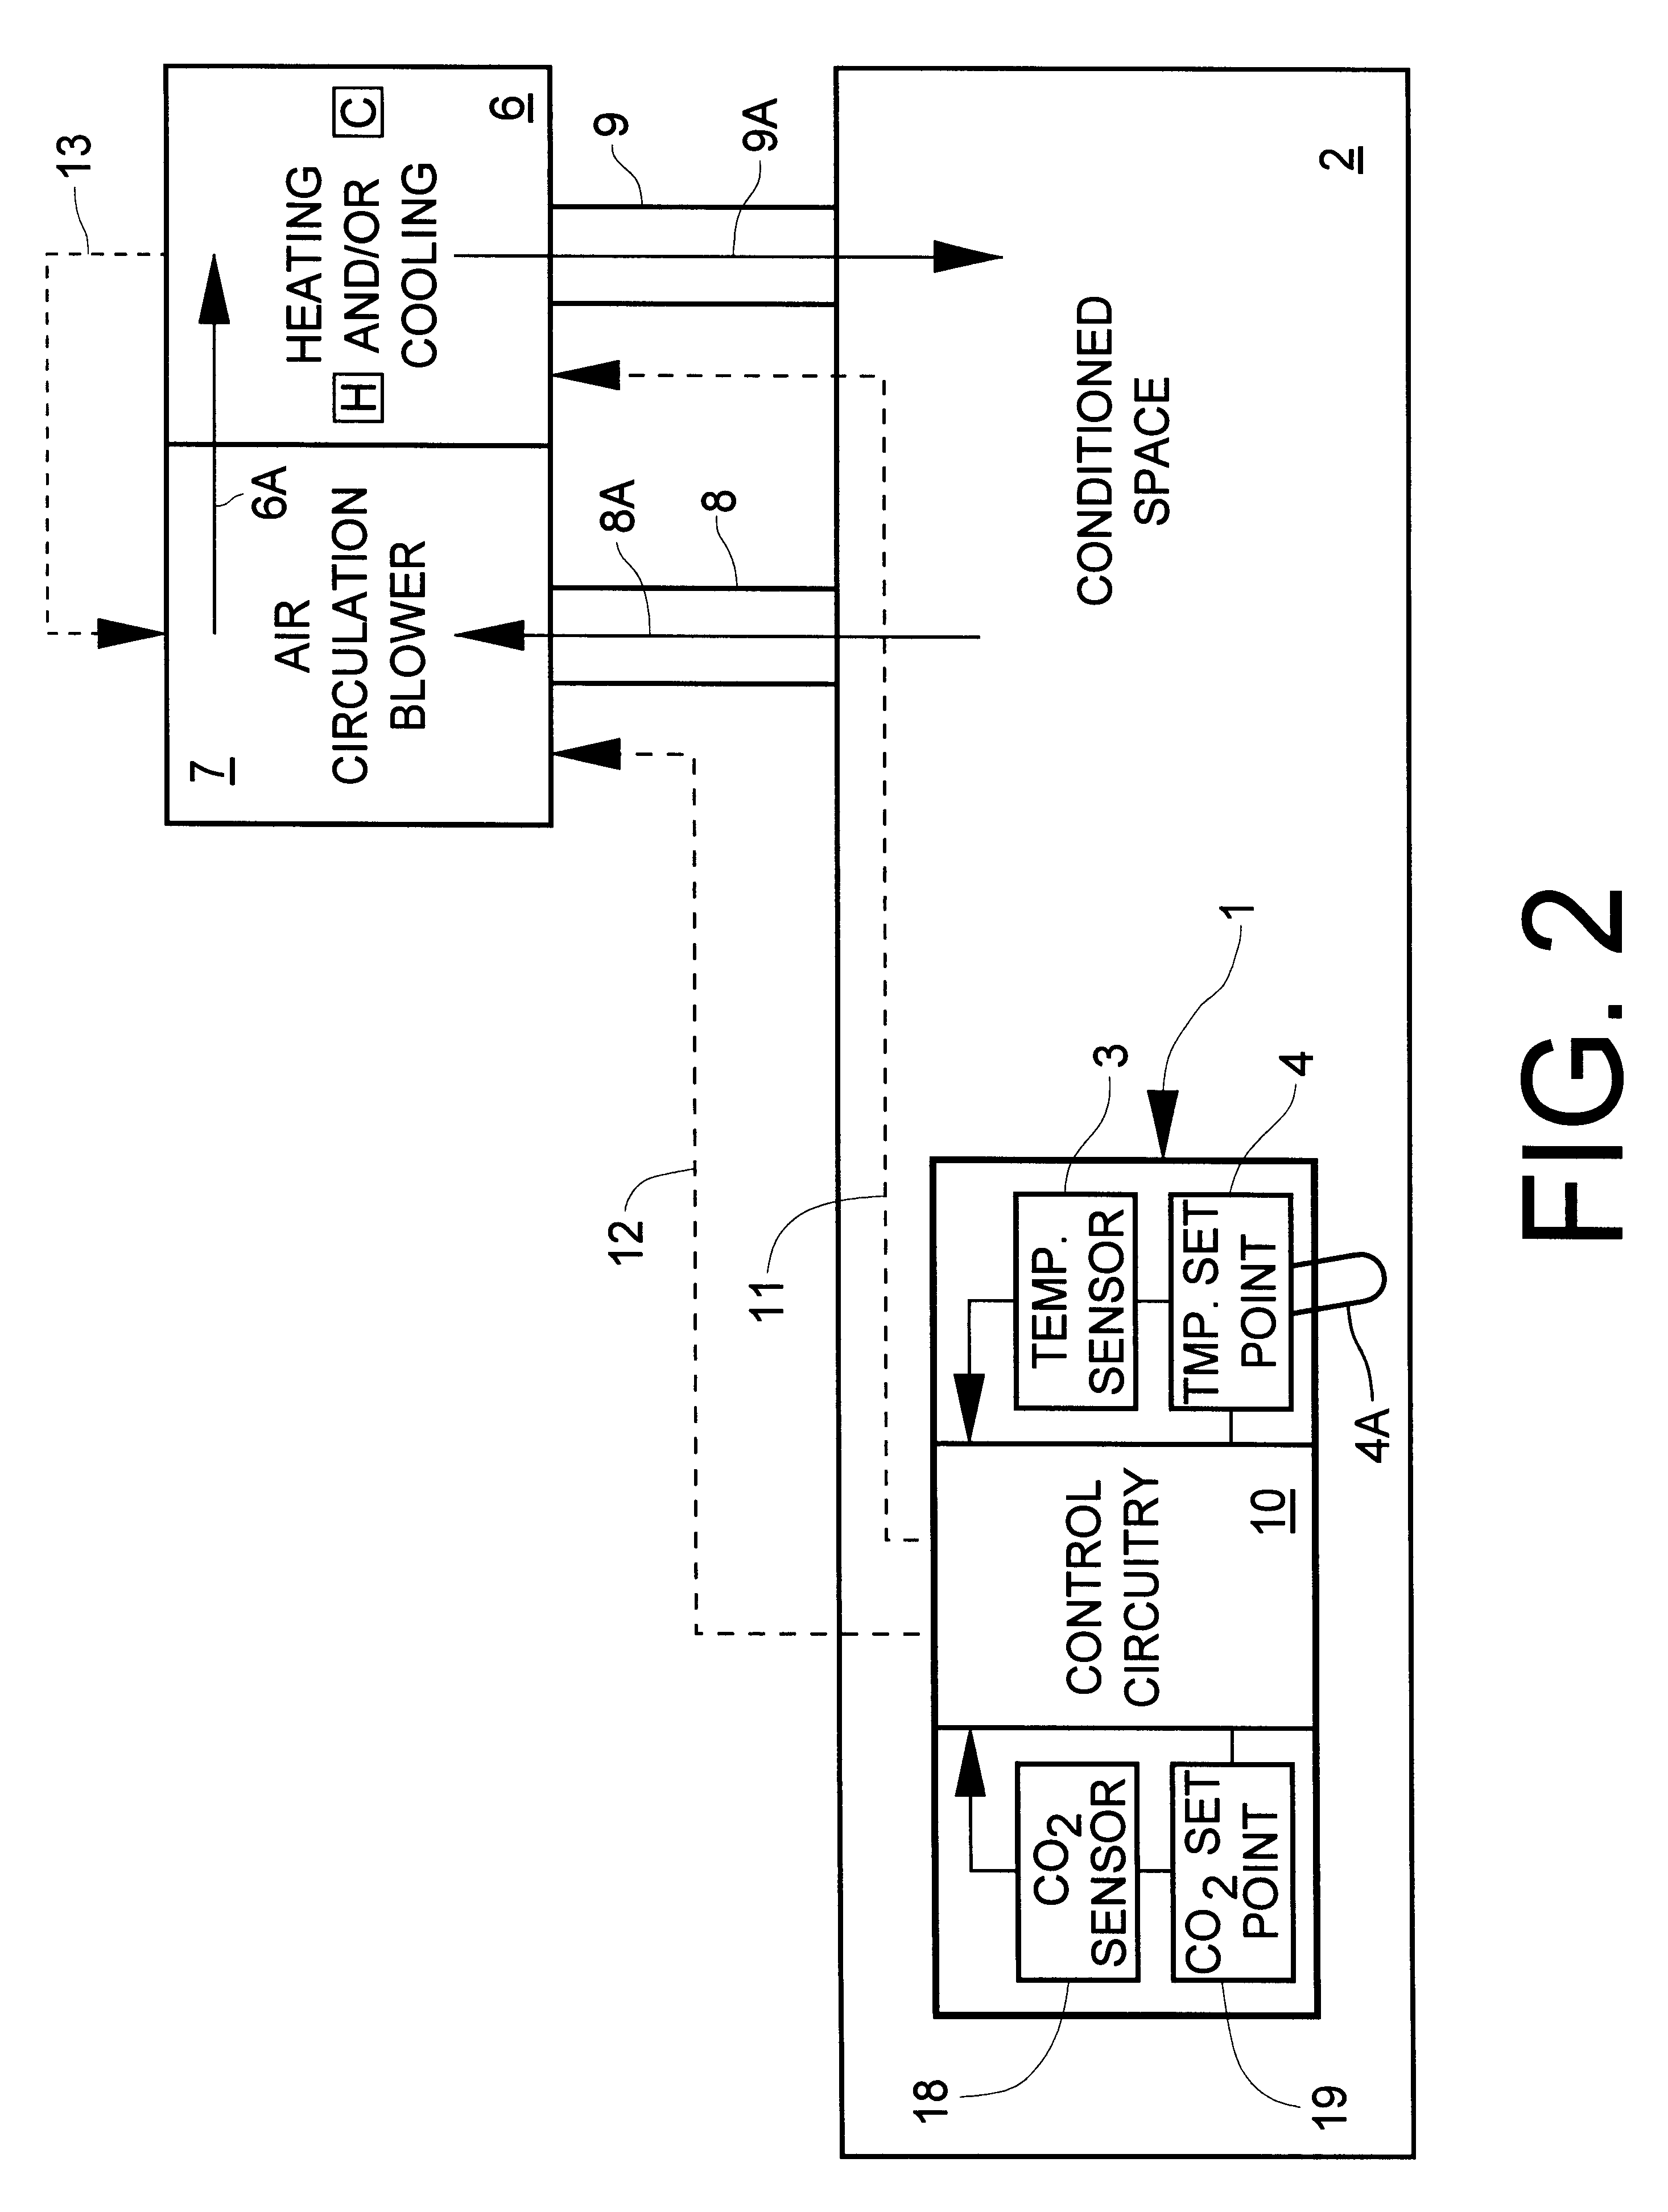 Thermostat incorporating thin film carbon dioxide sensor and environmental control system